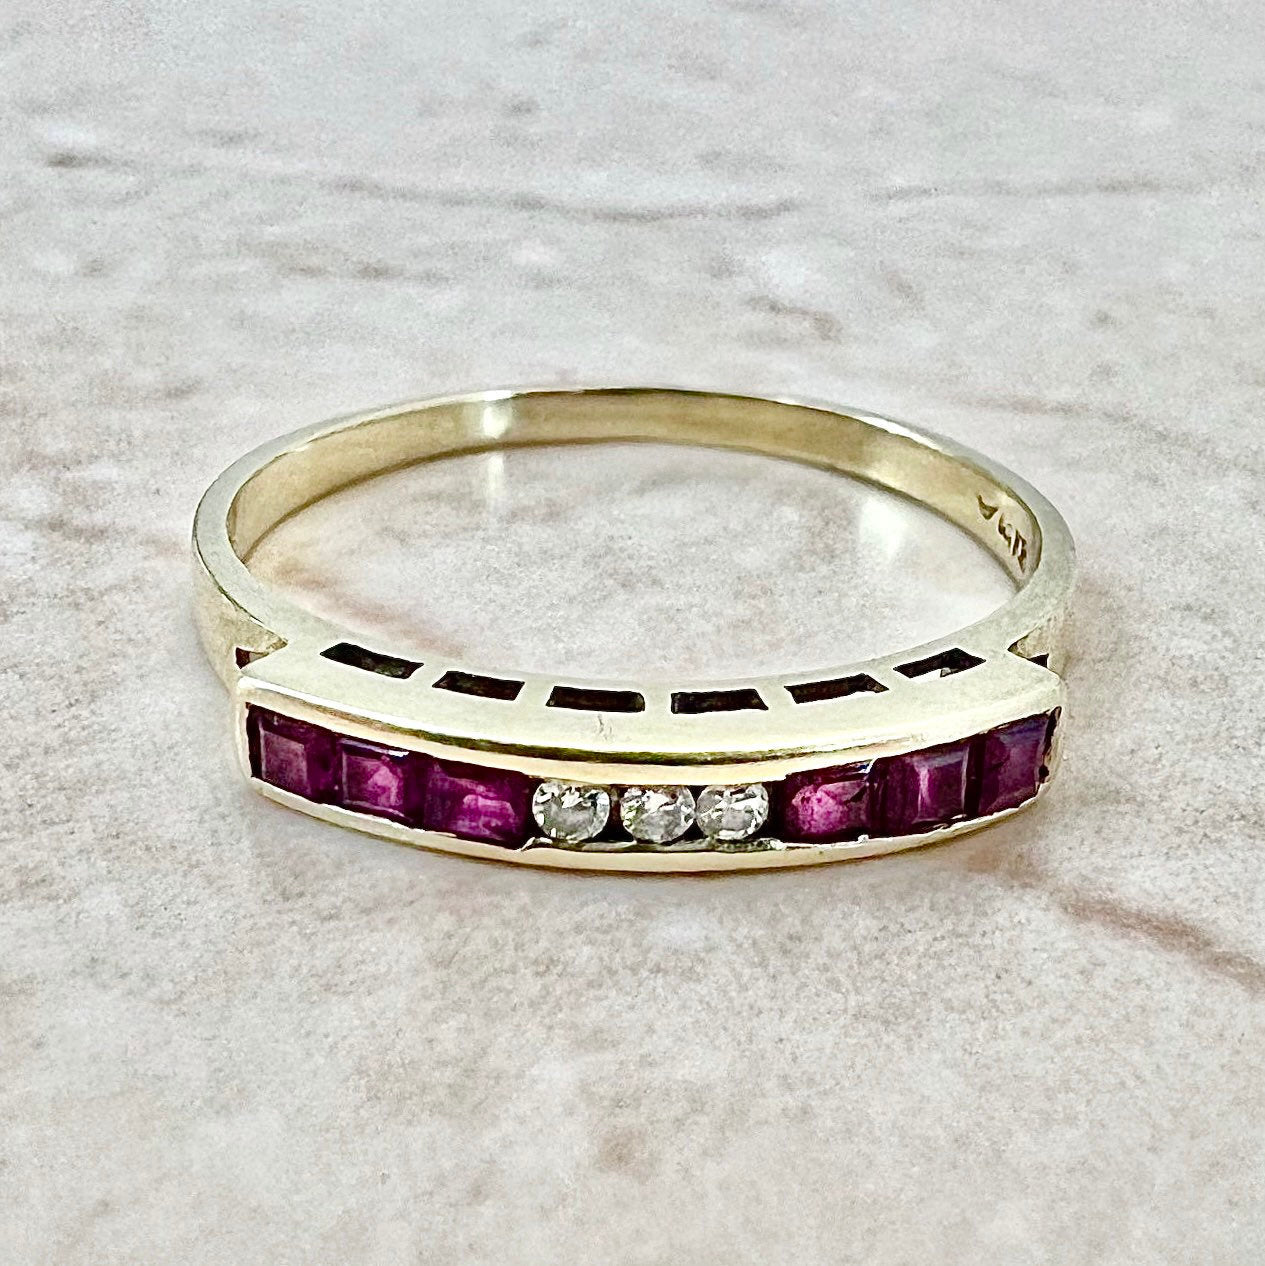 Vintage 14K Natural Ruby & Diamond Band Ring - Yellow Gold Ruby Ring - July Birthstone - Birthday Gift -Best Gift For Her